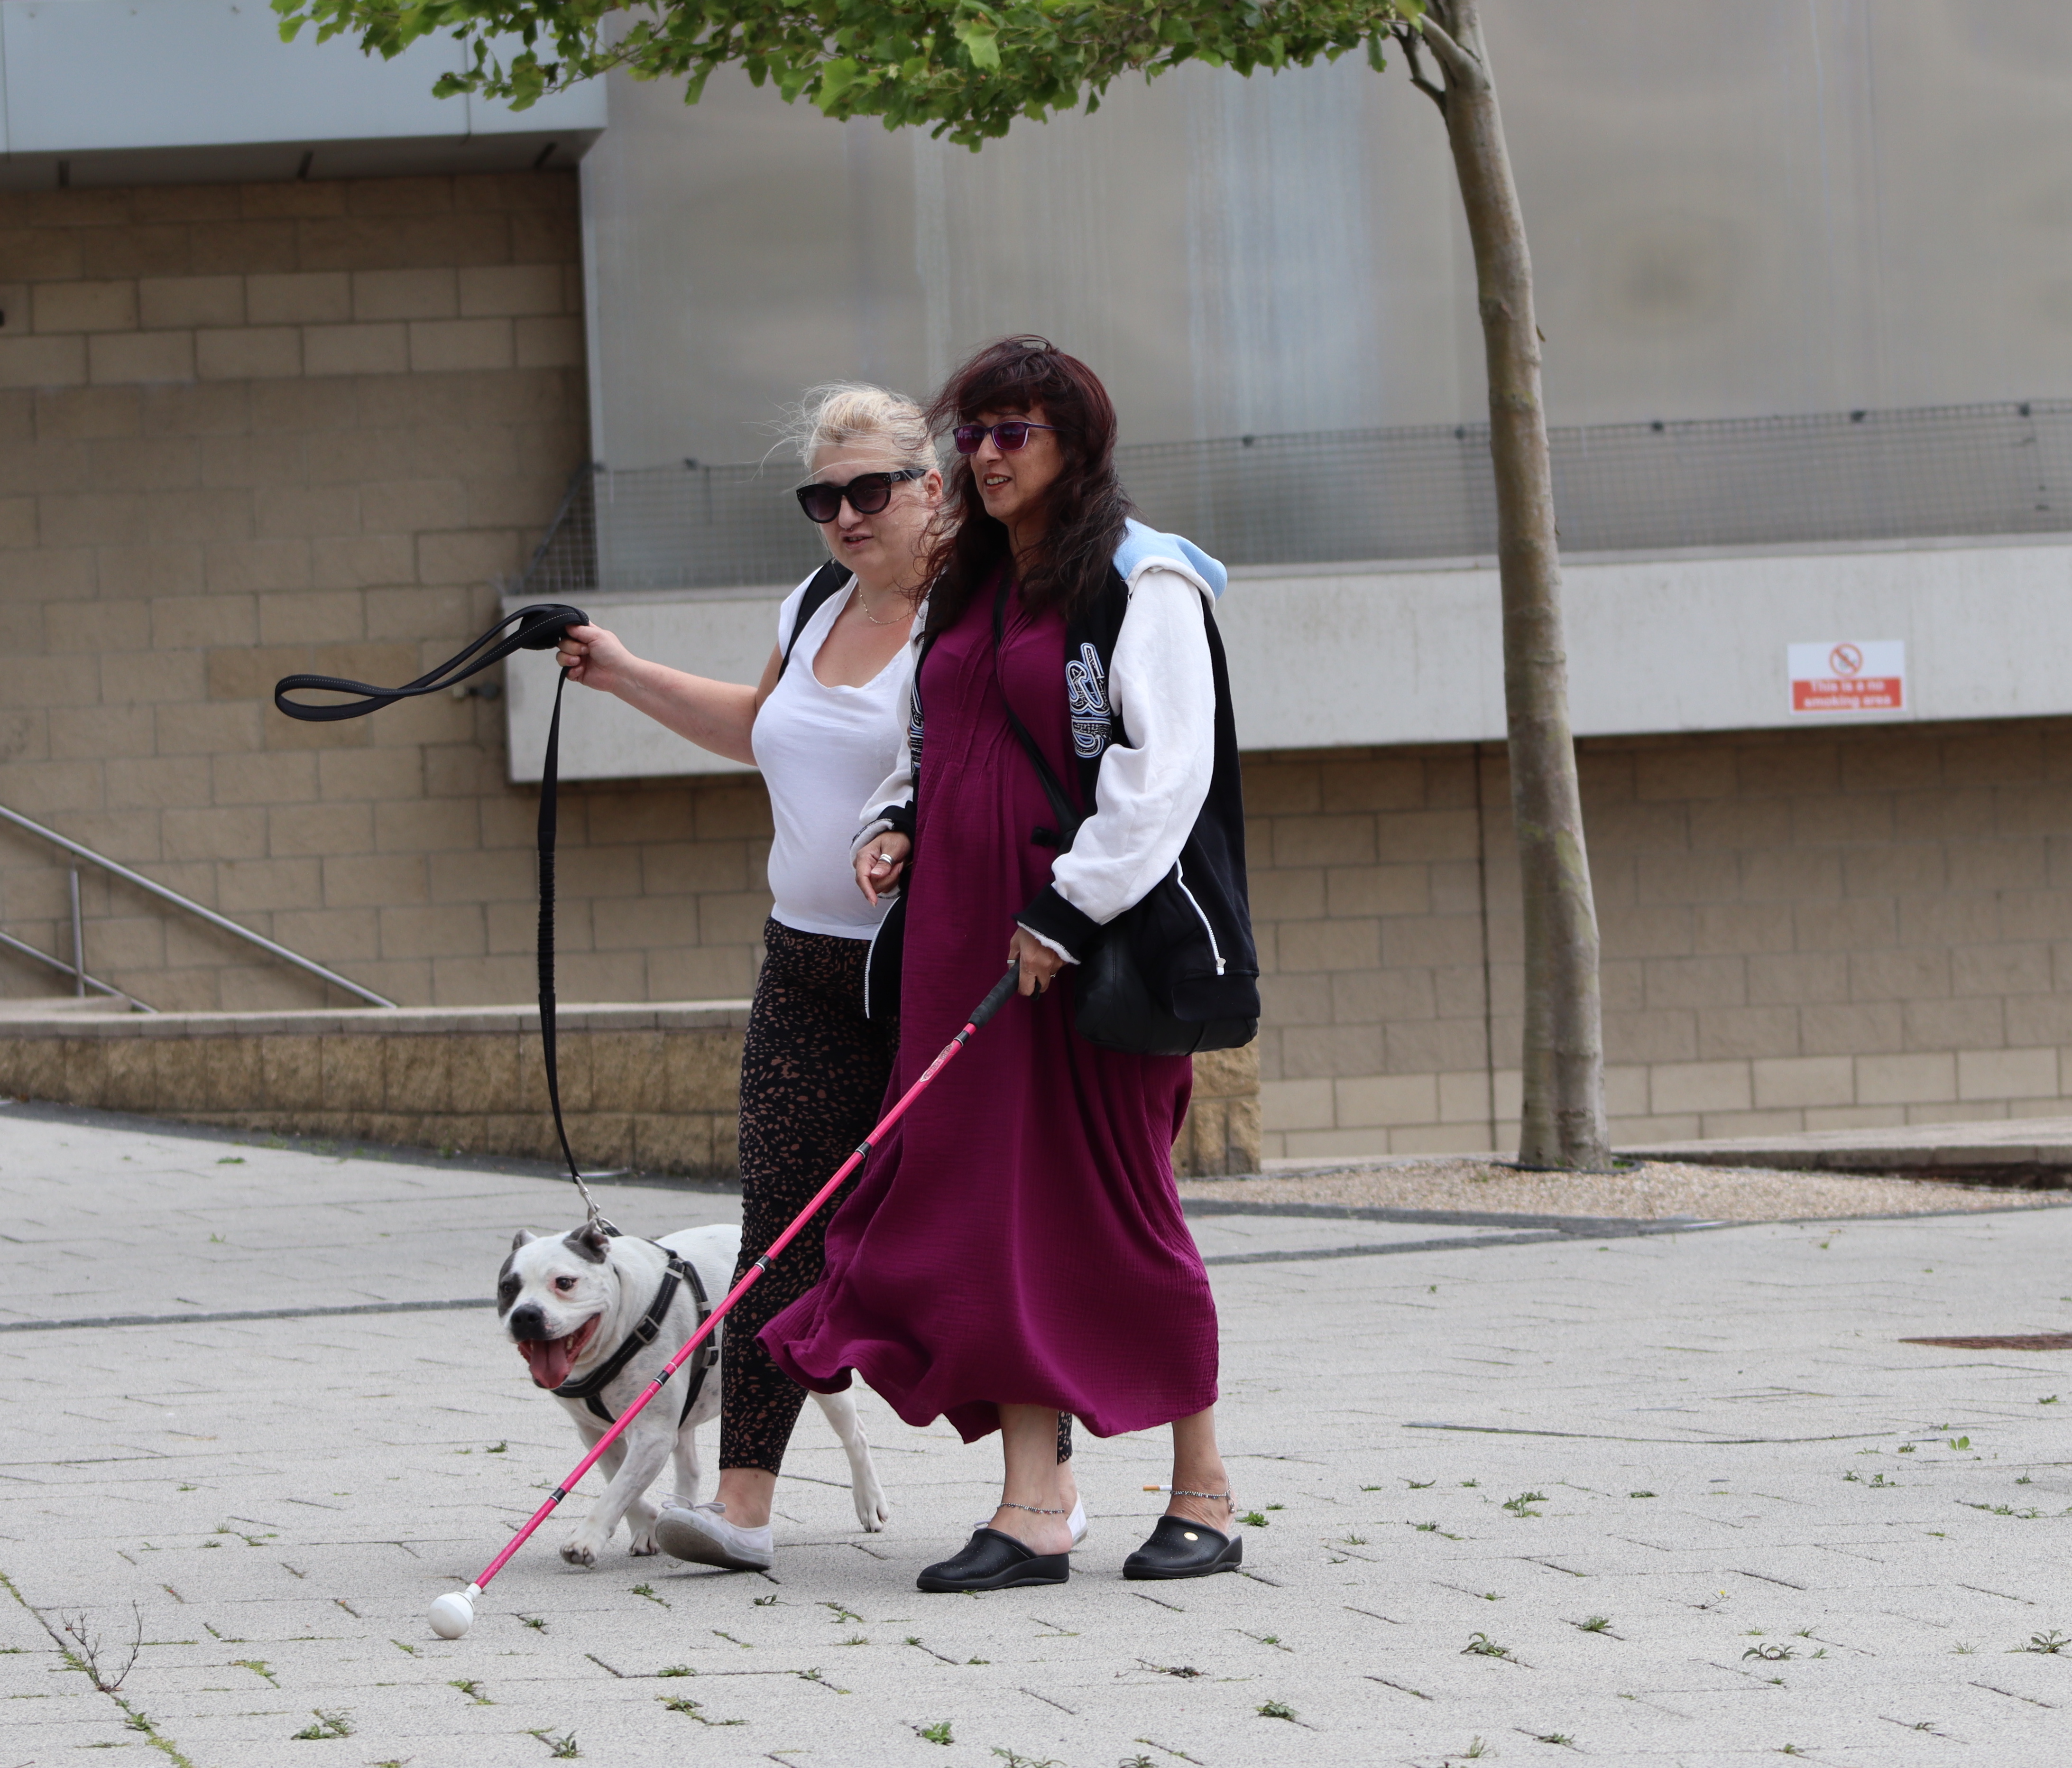 Photograph of two women walking arm in arm along the pavement. The woman on the left is blonde and holds the lead for a white dog and the woman on the right has brown hair, wears a magenta dress and is holding a pink cane. They both wear sunglasses.